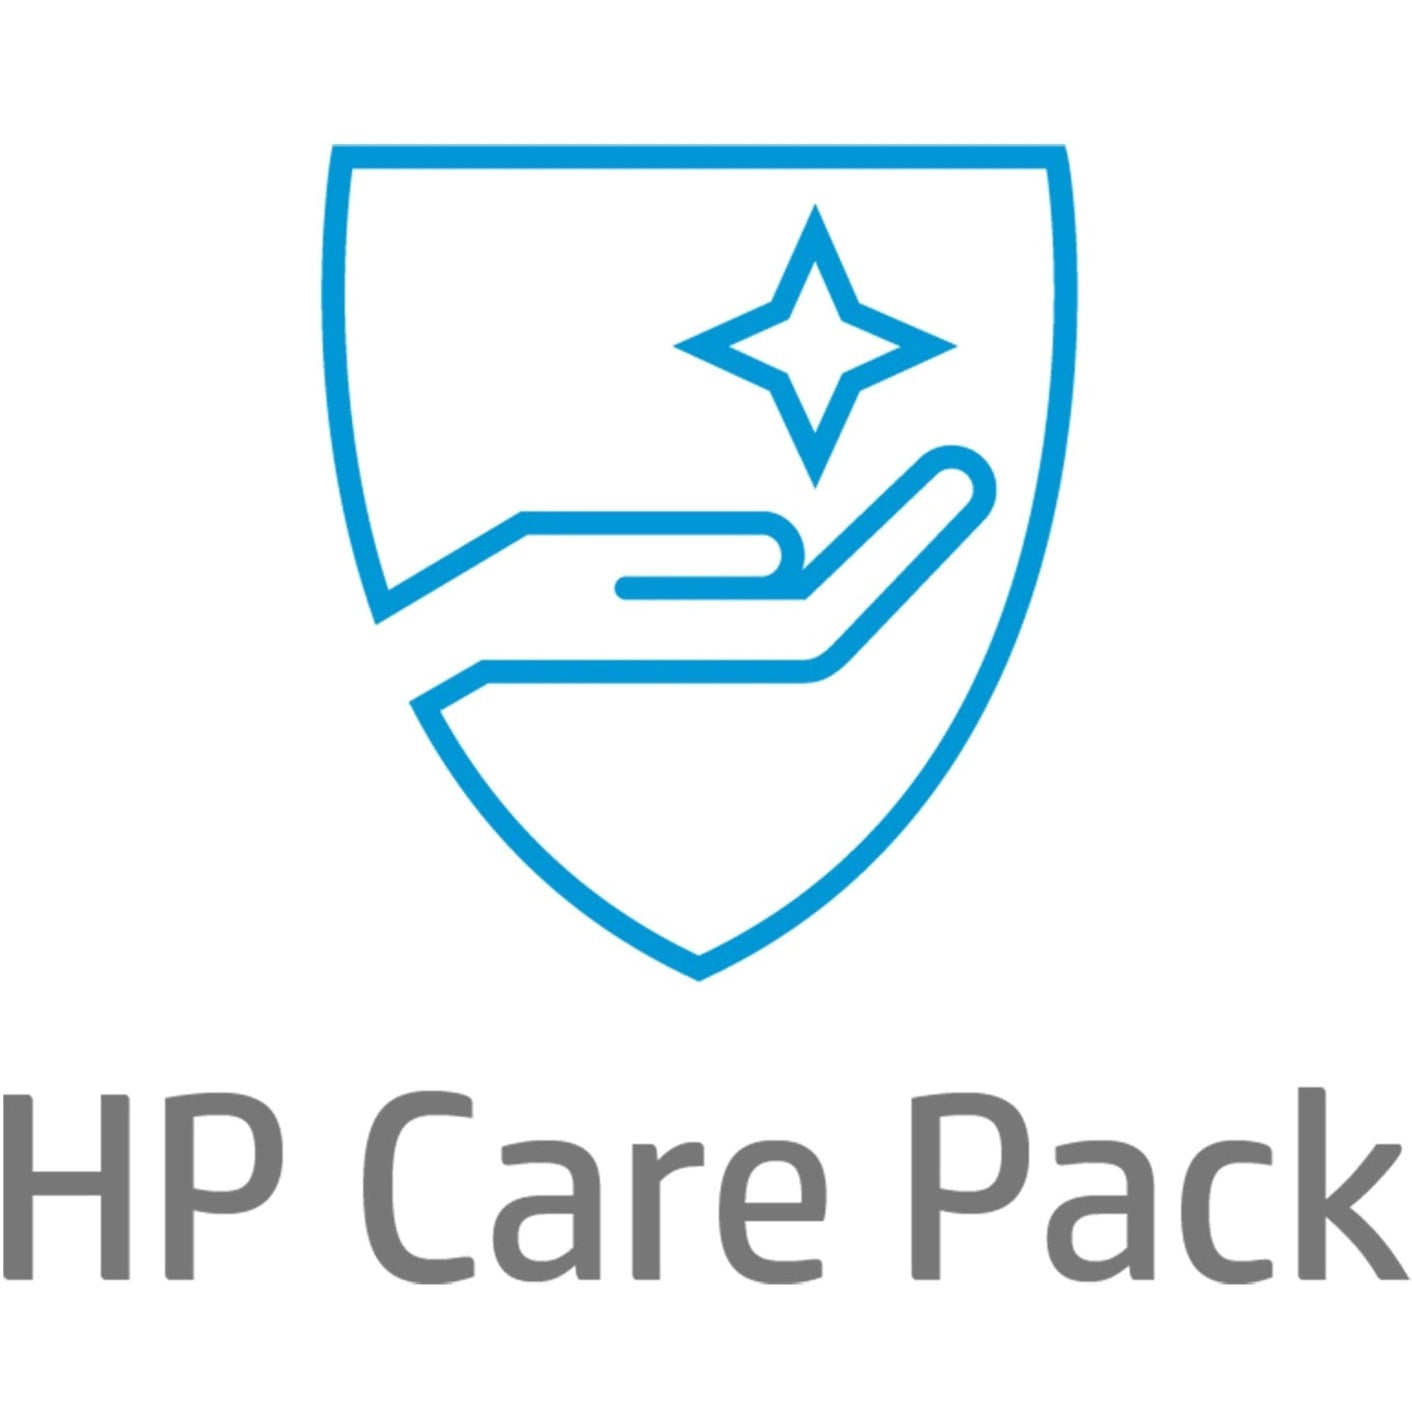 HP Care Pack Hardware Support with Accidental Damage Protection G2 - Extended Service - 2 Year - Service (U9DN8E)